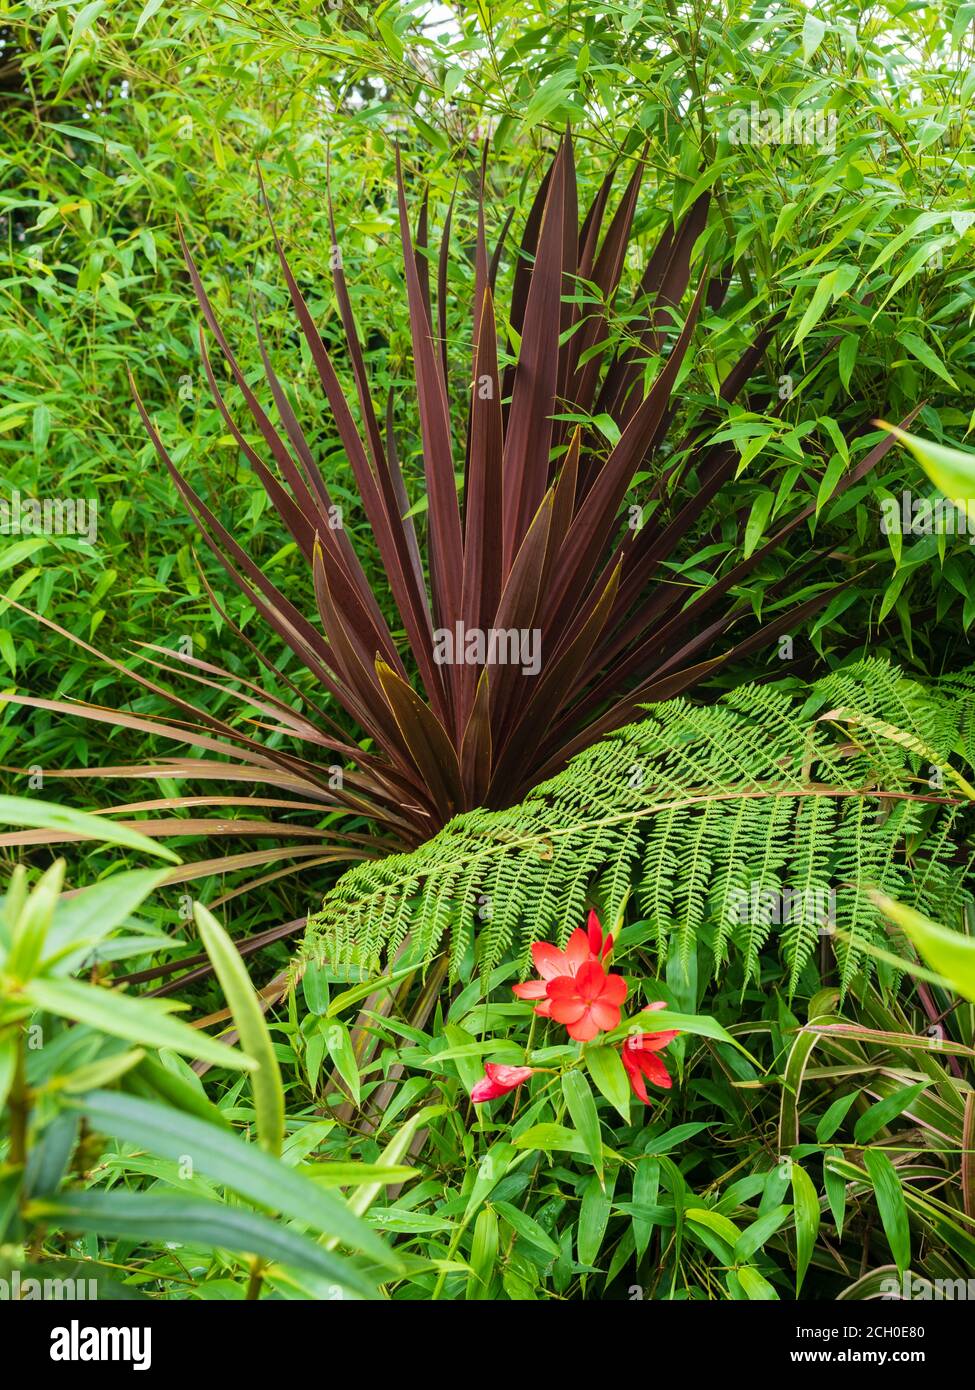 Cordyline australis 'Red Star' in a foliage combination with the leaves of black bamboo, Phyllostachys nigra in a Devon, UK garden Stock Photo